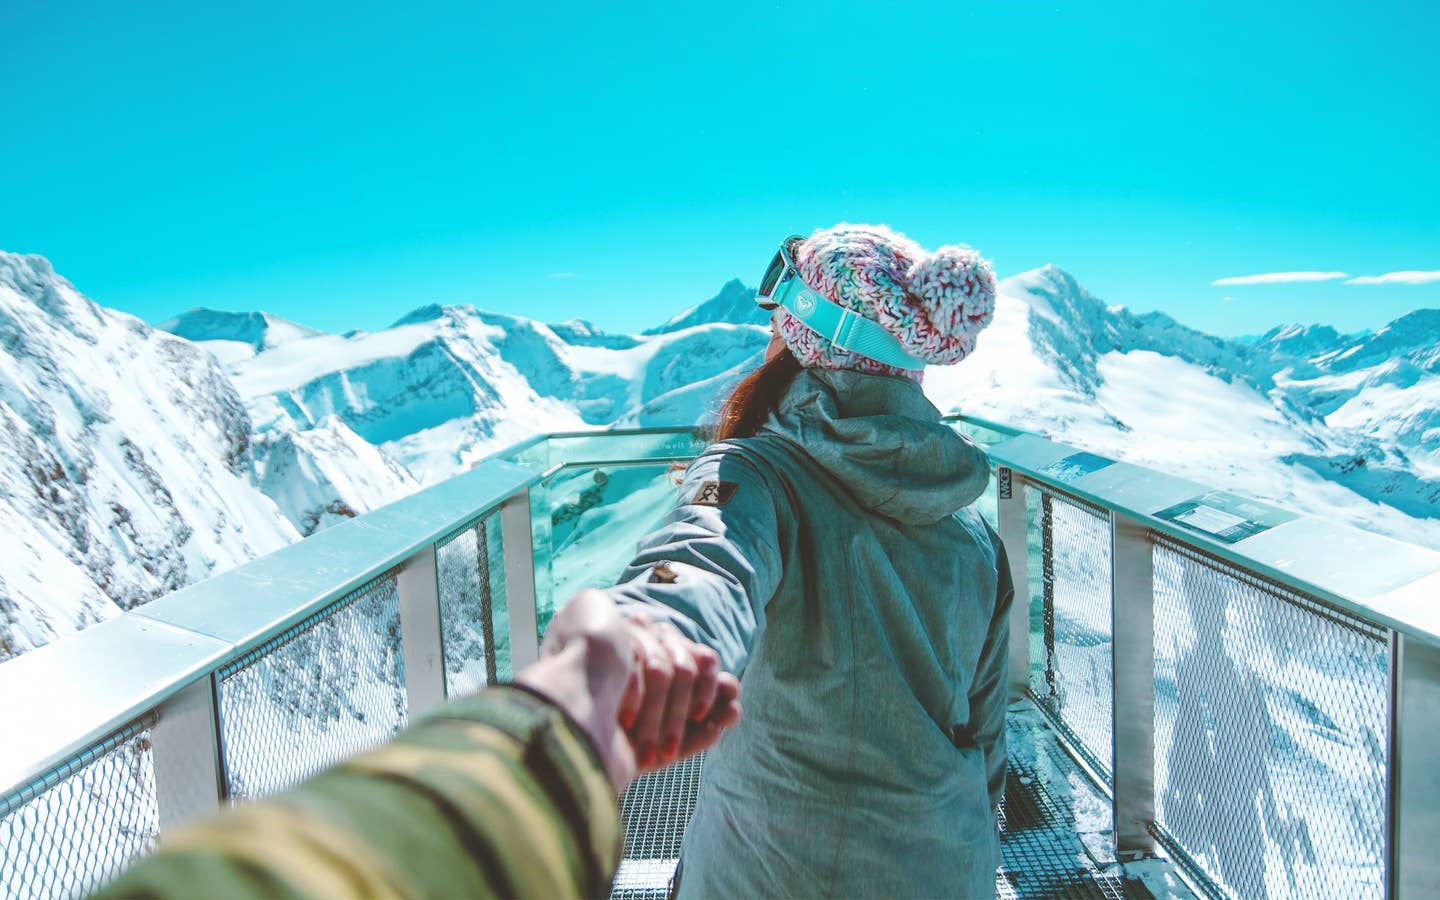 A woman holds a man's hand while wearing winter apparel and ski goggles looking off at snowcapped mountains under a blue sky.